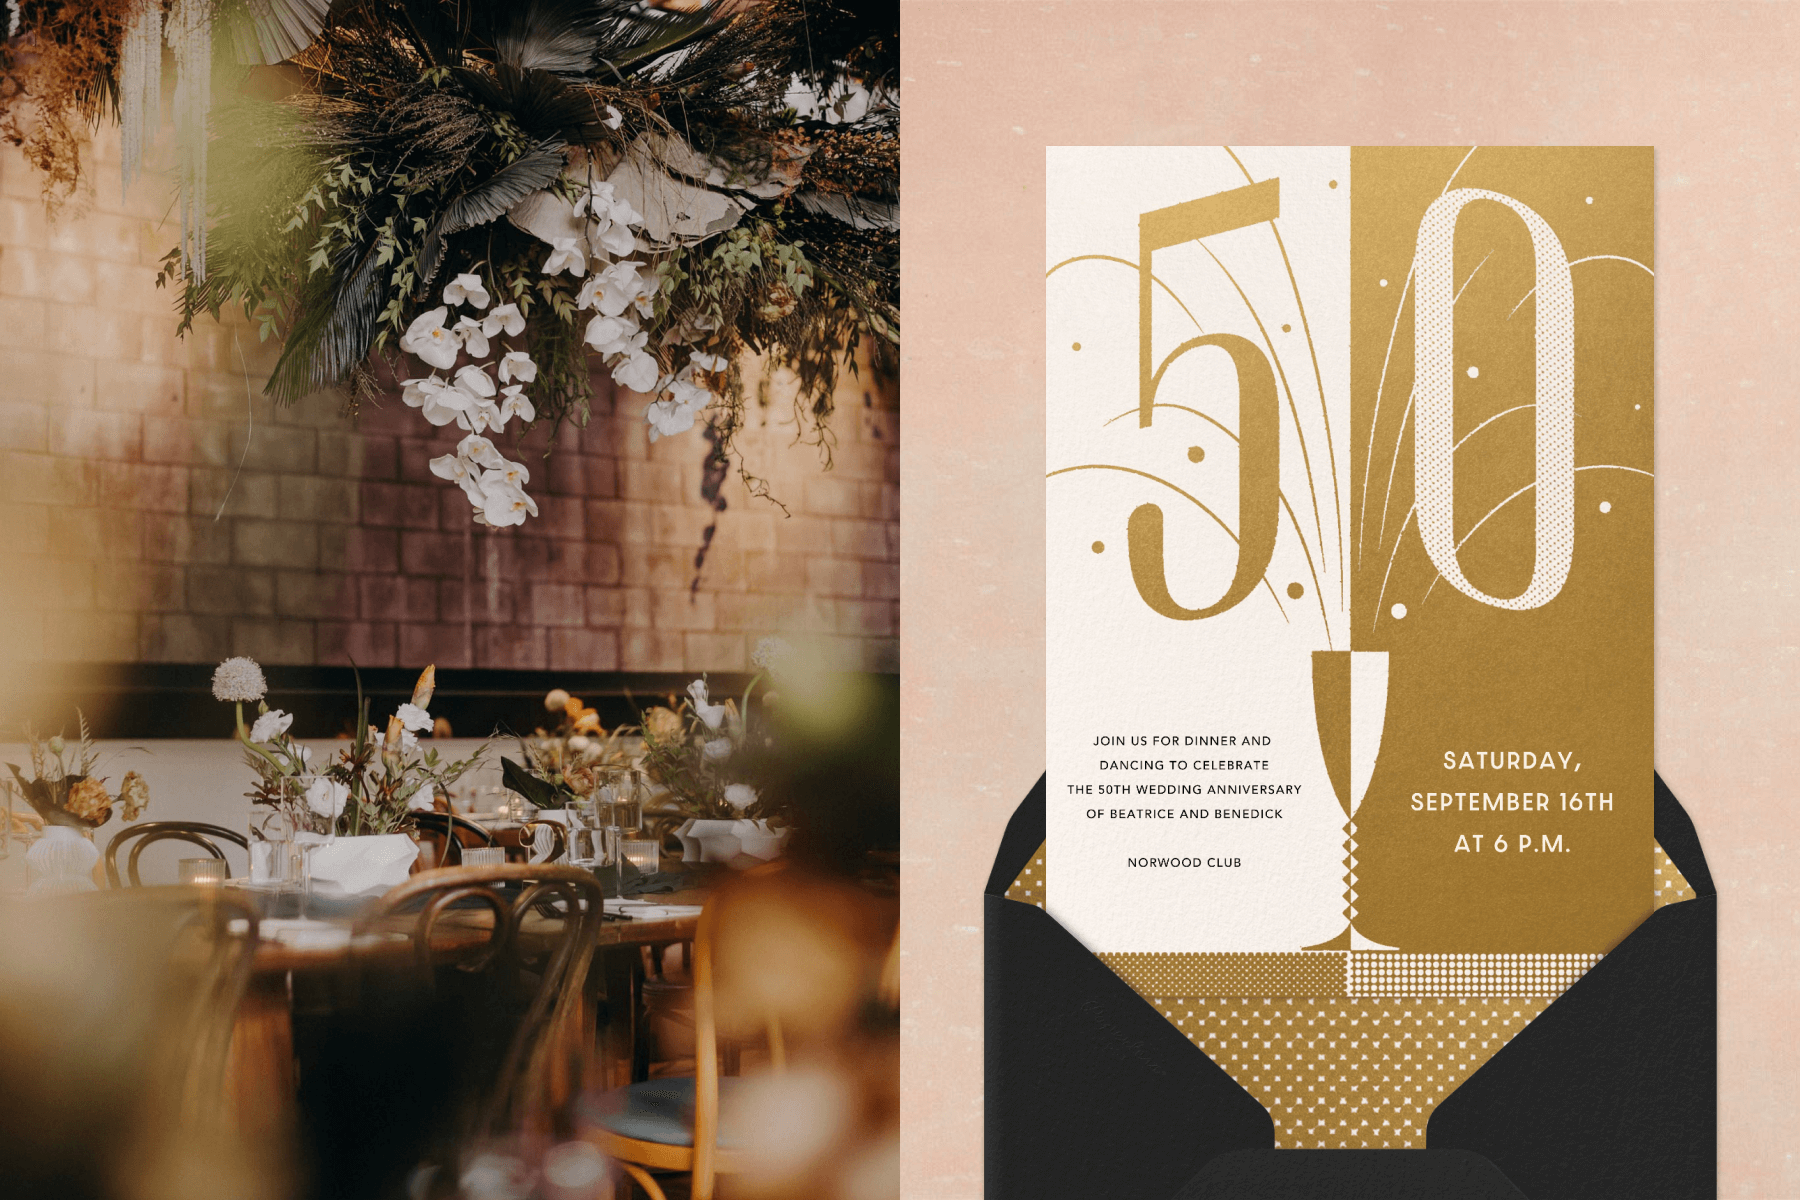 Left: A wooden dining table in a brick-walled room with fall-colored flowers in vases and a tropical plant installation on the ceiling. Right: A 50th birthday party invitation split in two, one side white and the other gold, with a 2-toned champagne glass at the center.